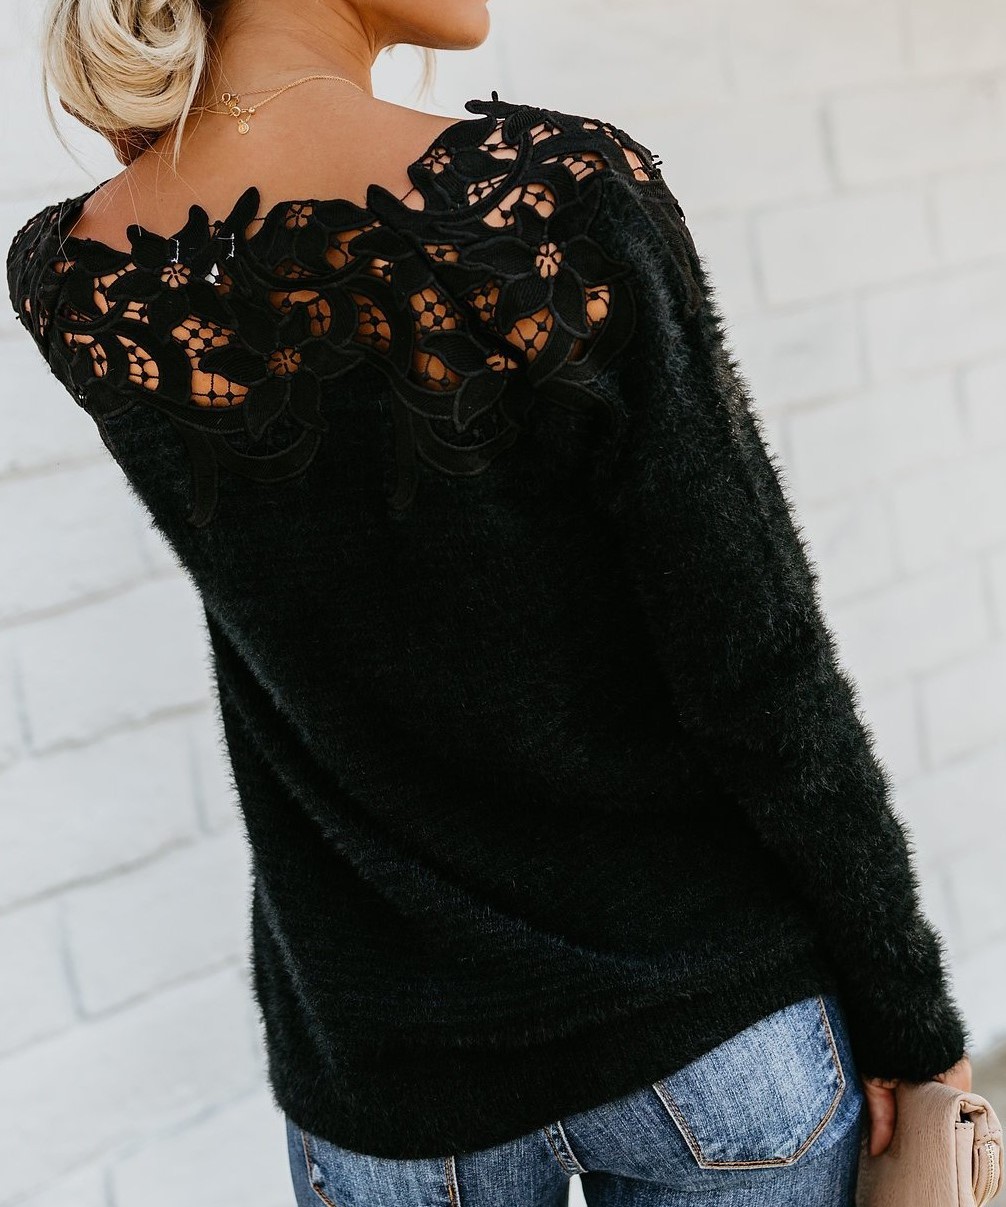 US$ 27.89 - Women Off Shoulder Lace Patchwork Long Sleeve Sweaters Tops ...